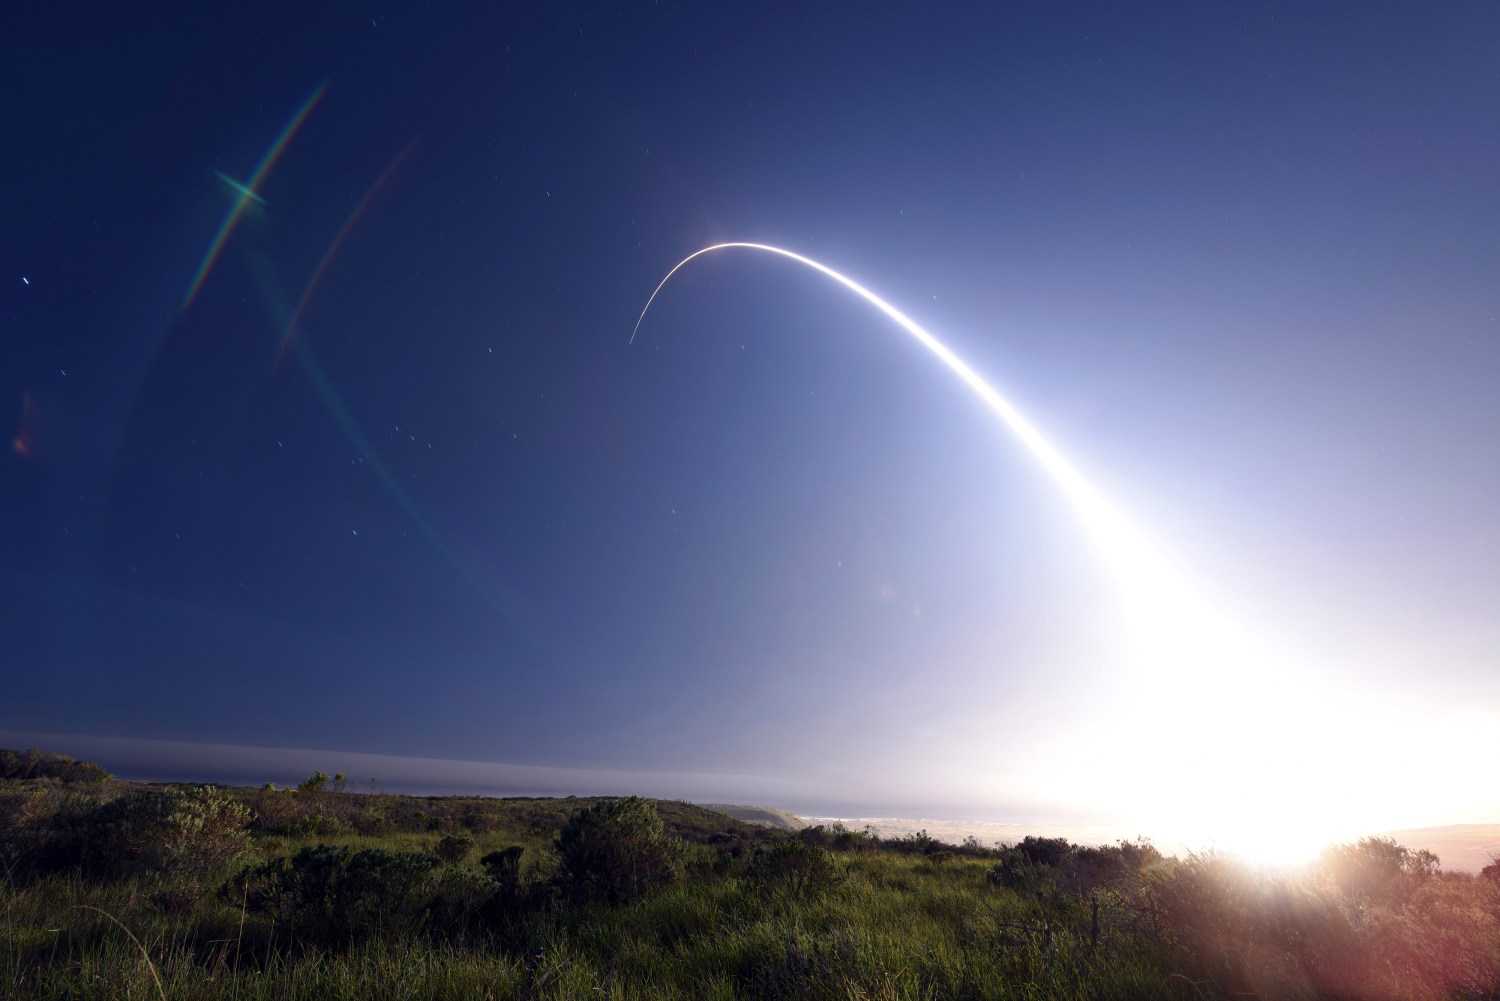 An unarmed Minuteman III intercontinental ballistic missile launches during an operational test from Vandenberg Air Force Base, California at 11:01 p.m. On February 25, 2016. The unarmed Minuteman III missile blasted off from a silo at Vandenberg Air Force Base in California late on Thursday, headed toward a target area near Kwajalein Atoll in the Marshall Islands of the South Pacific.   REUTERS/Kyla Gifford/U.S. Air Force Photo/Handout via Reuters FOR EDITORIAL USE ONLY. NOT FOR SALE FOR MARKETING OR ADVERTISING CAMPAIGNS. THIS IMAGE HAS BEEN SUPPLIED BY A THIRD PARTY. IT IS DISTRIBUTED, EXACTLY AS RECEIVED BY REUTERS, AS A SERVICE TO CLIENTS